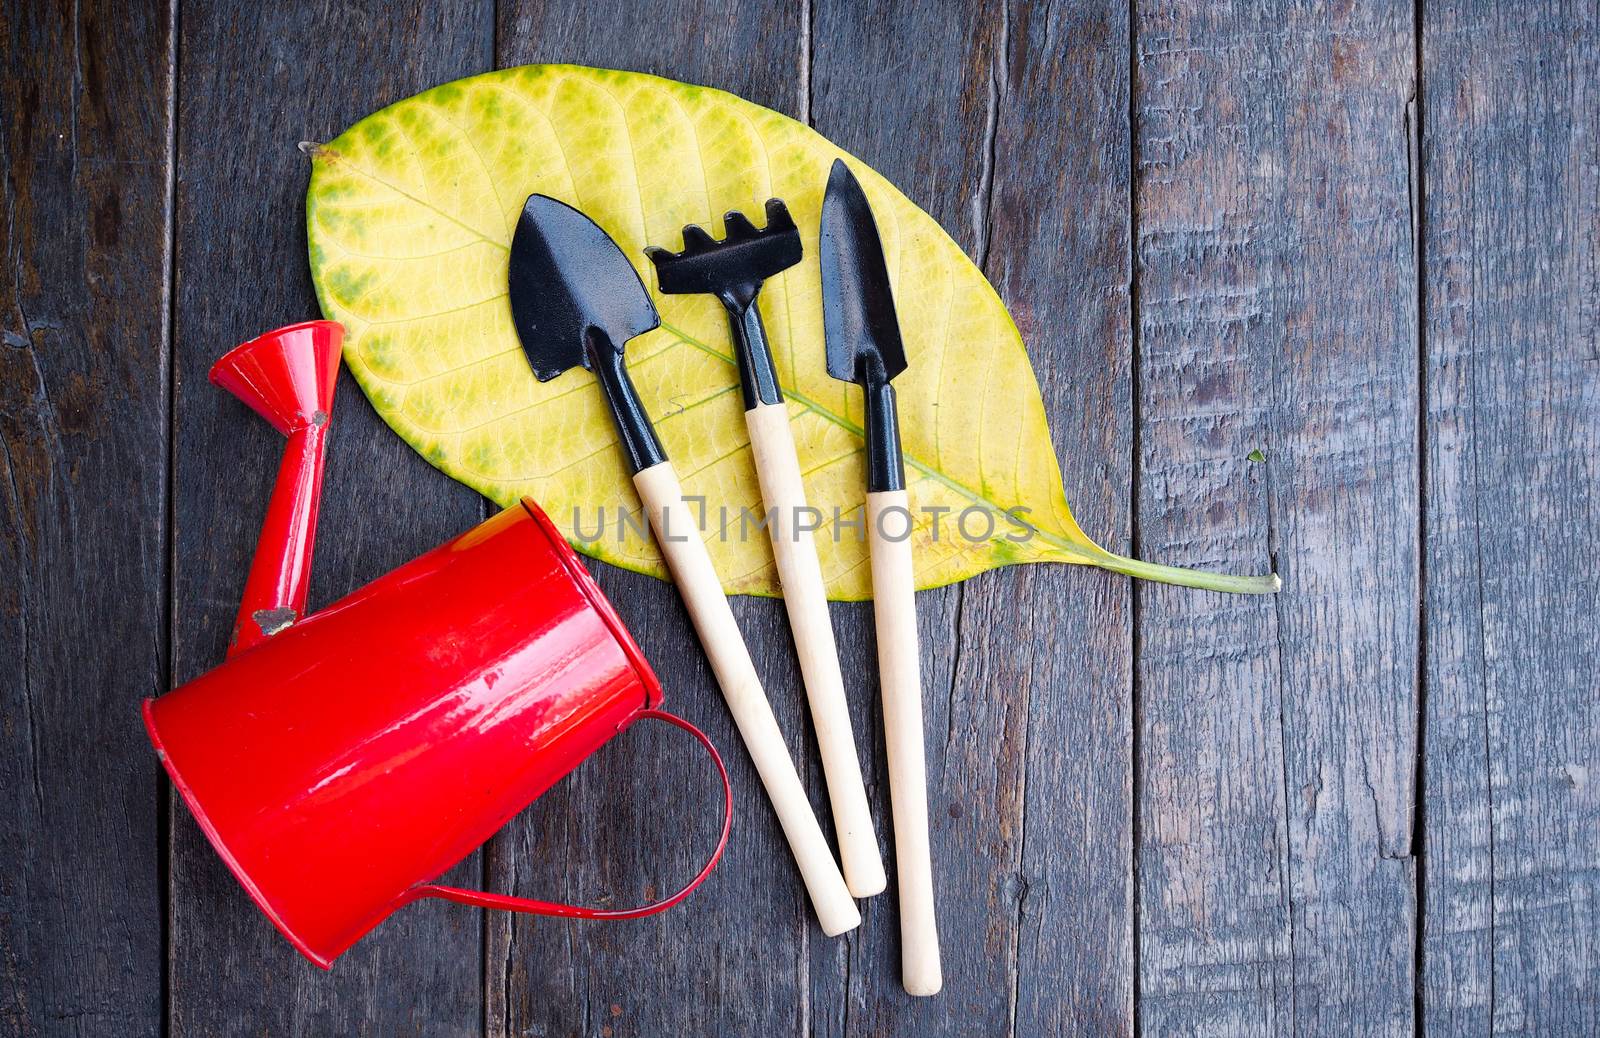 Red watering can And gardening equipment tool for planting trees put on yellow leaf on dark brown wood table.